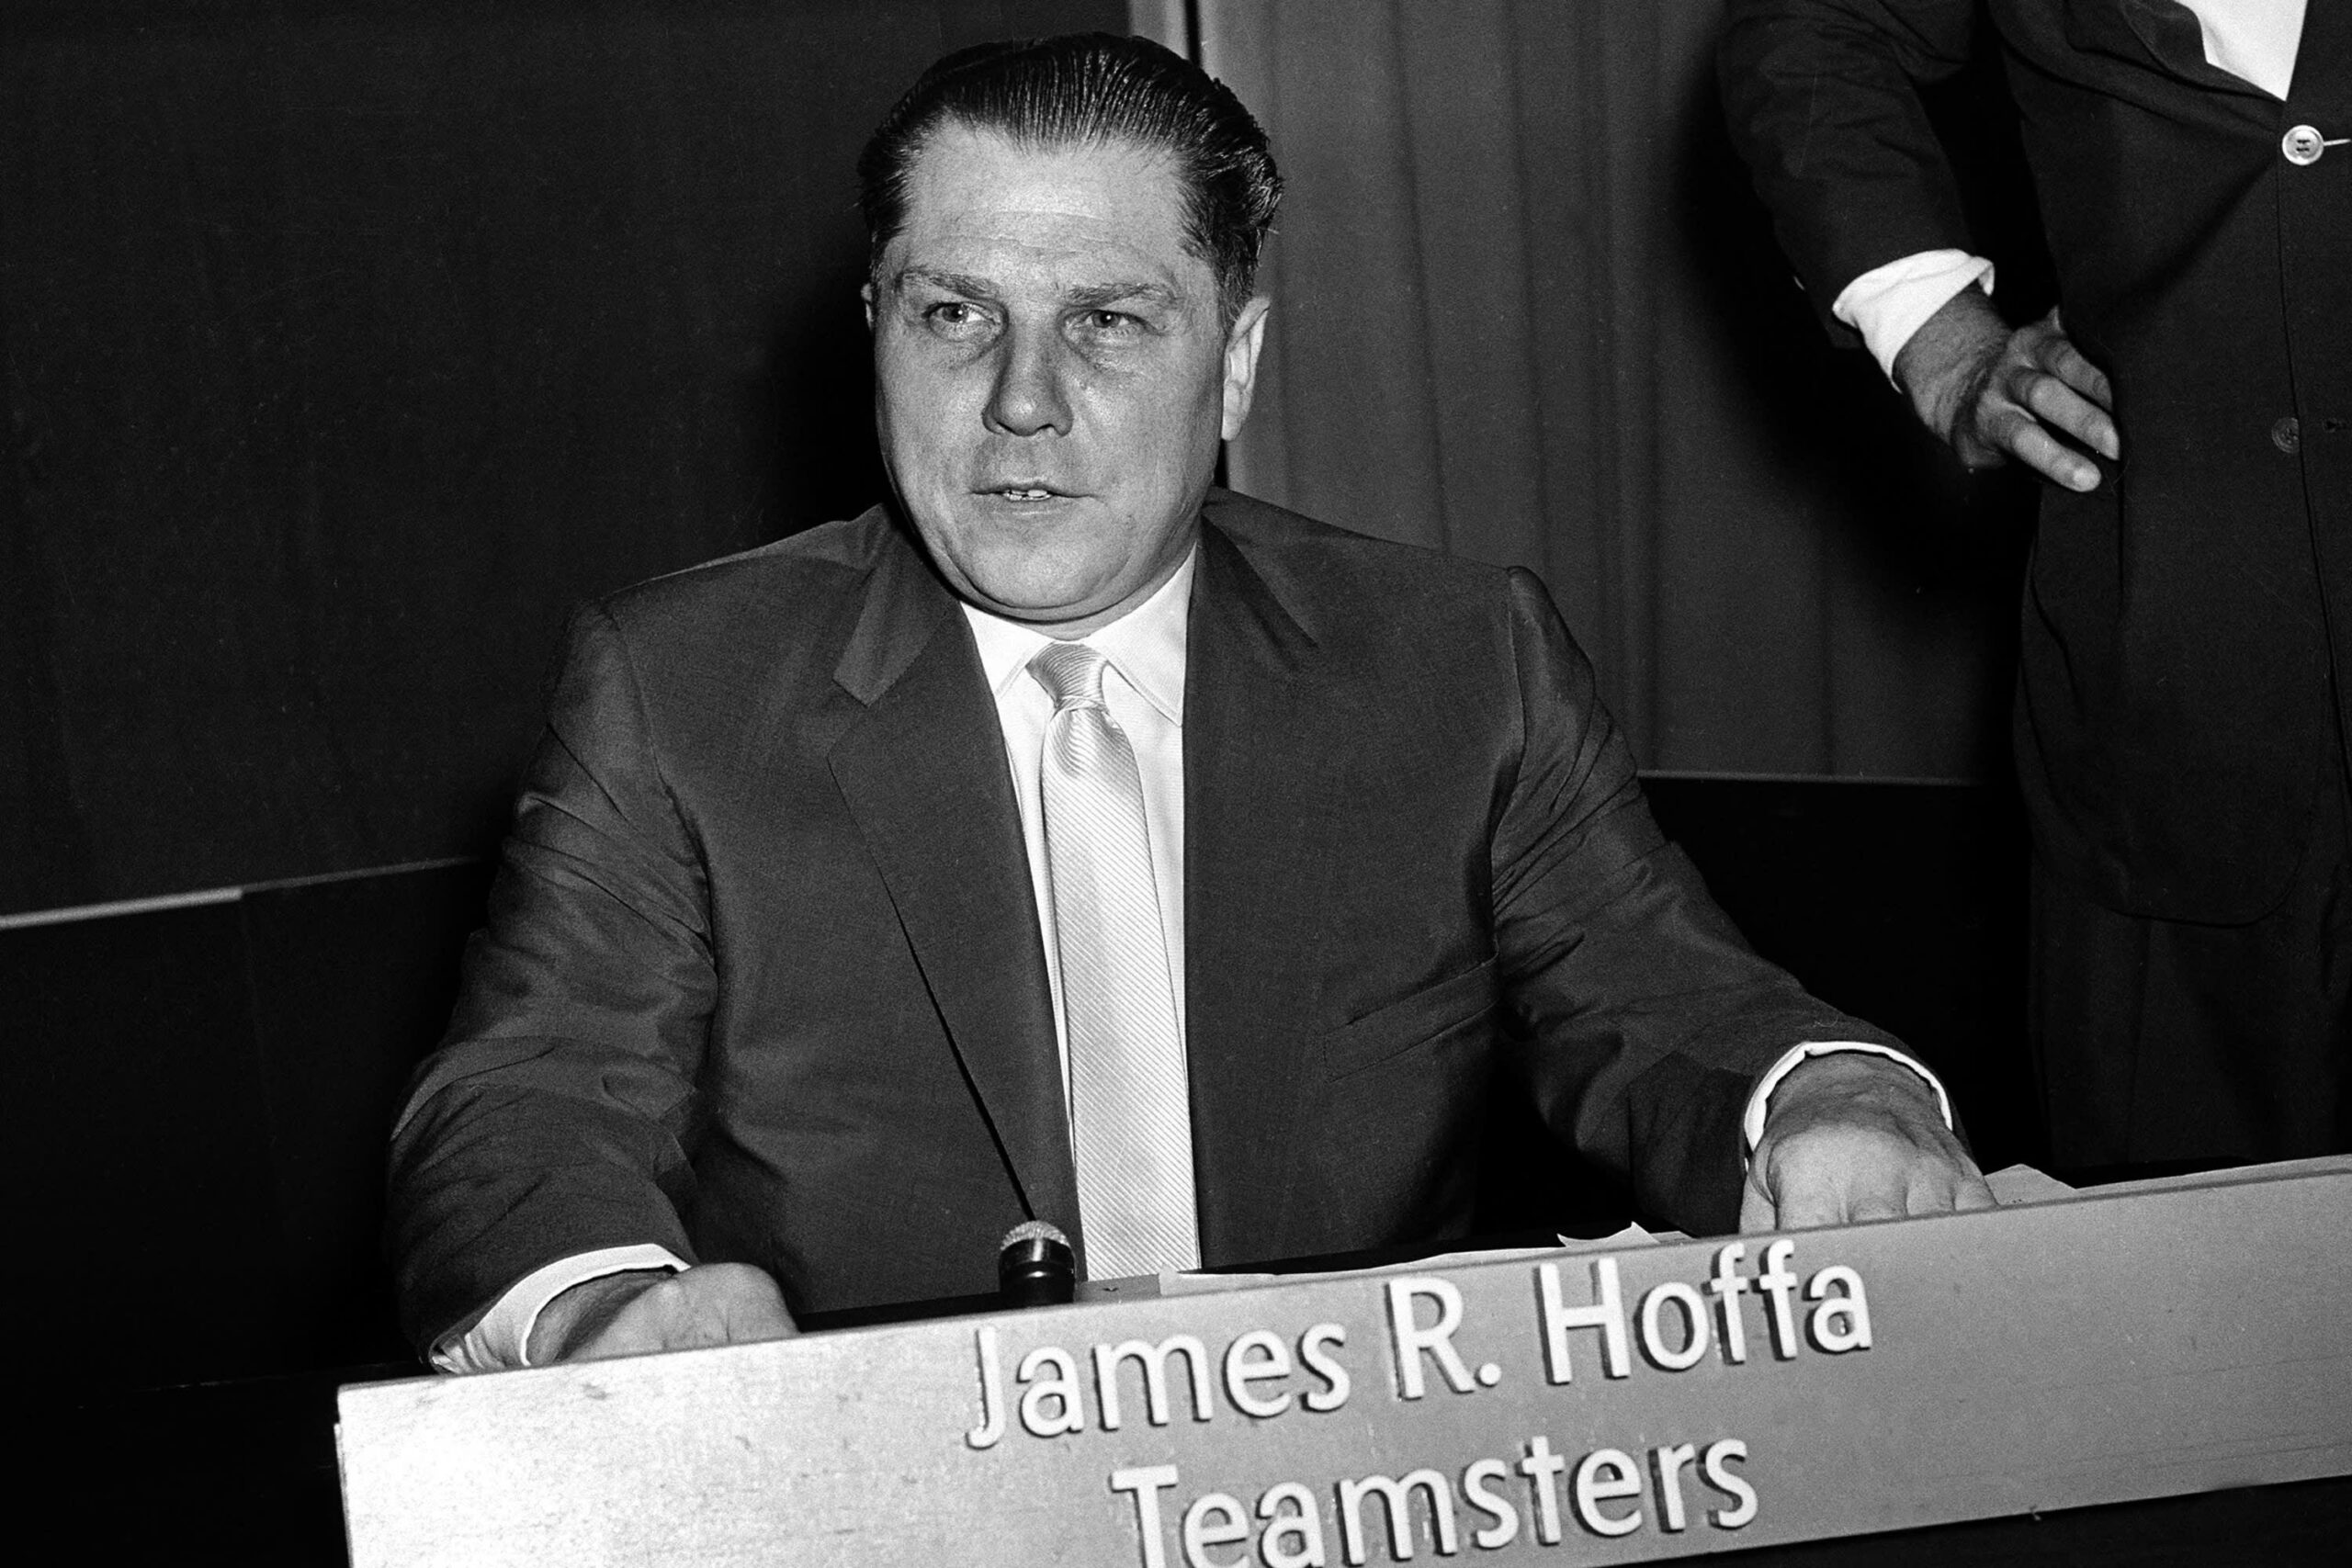 FBI searched New Jersey for Jimmy Hoffa, missing Teamsters leader